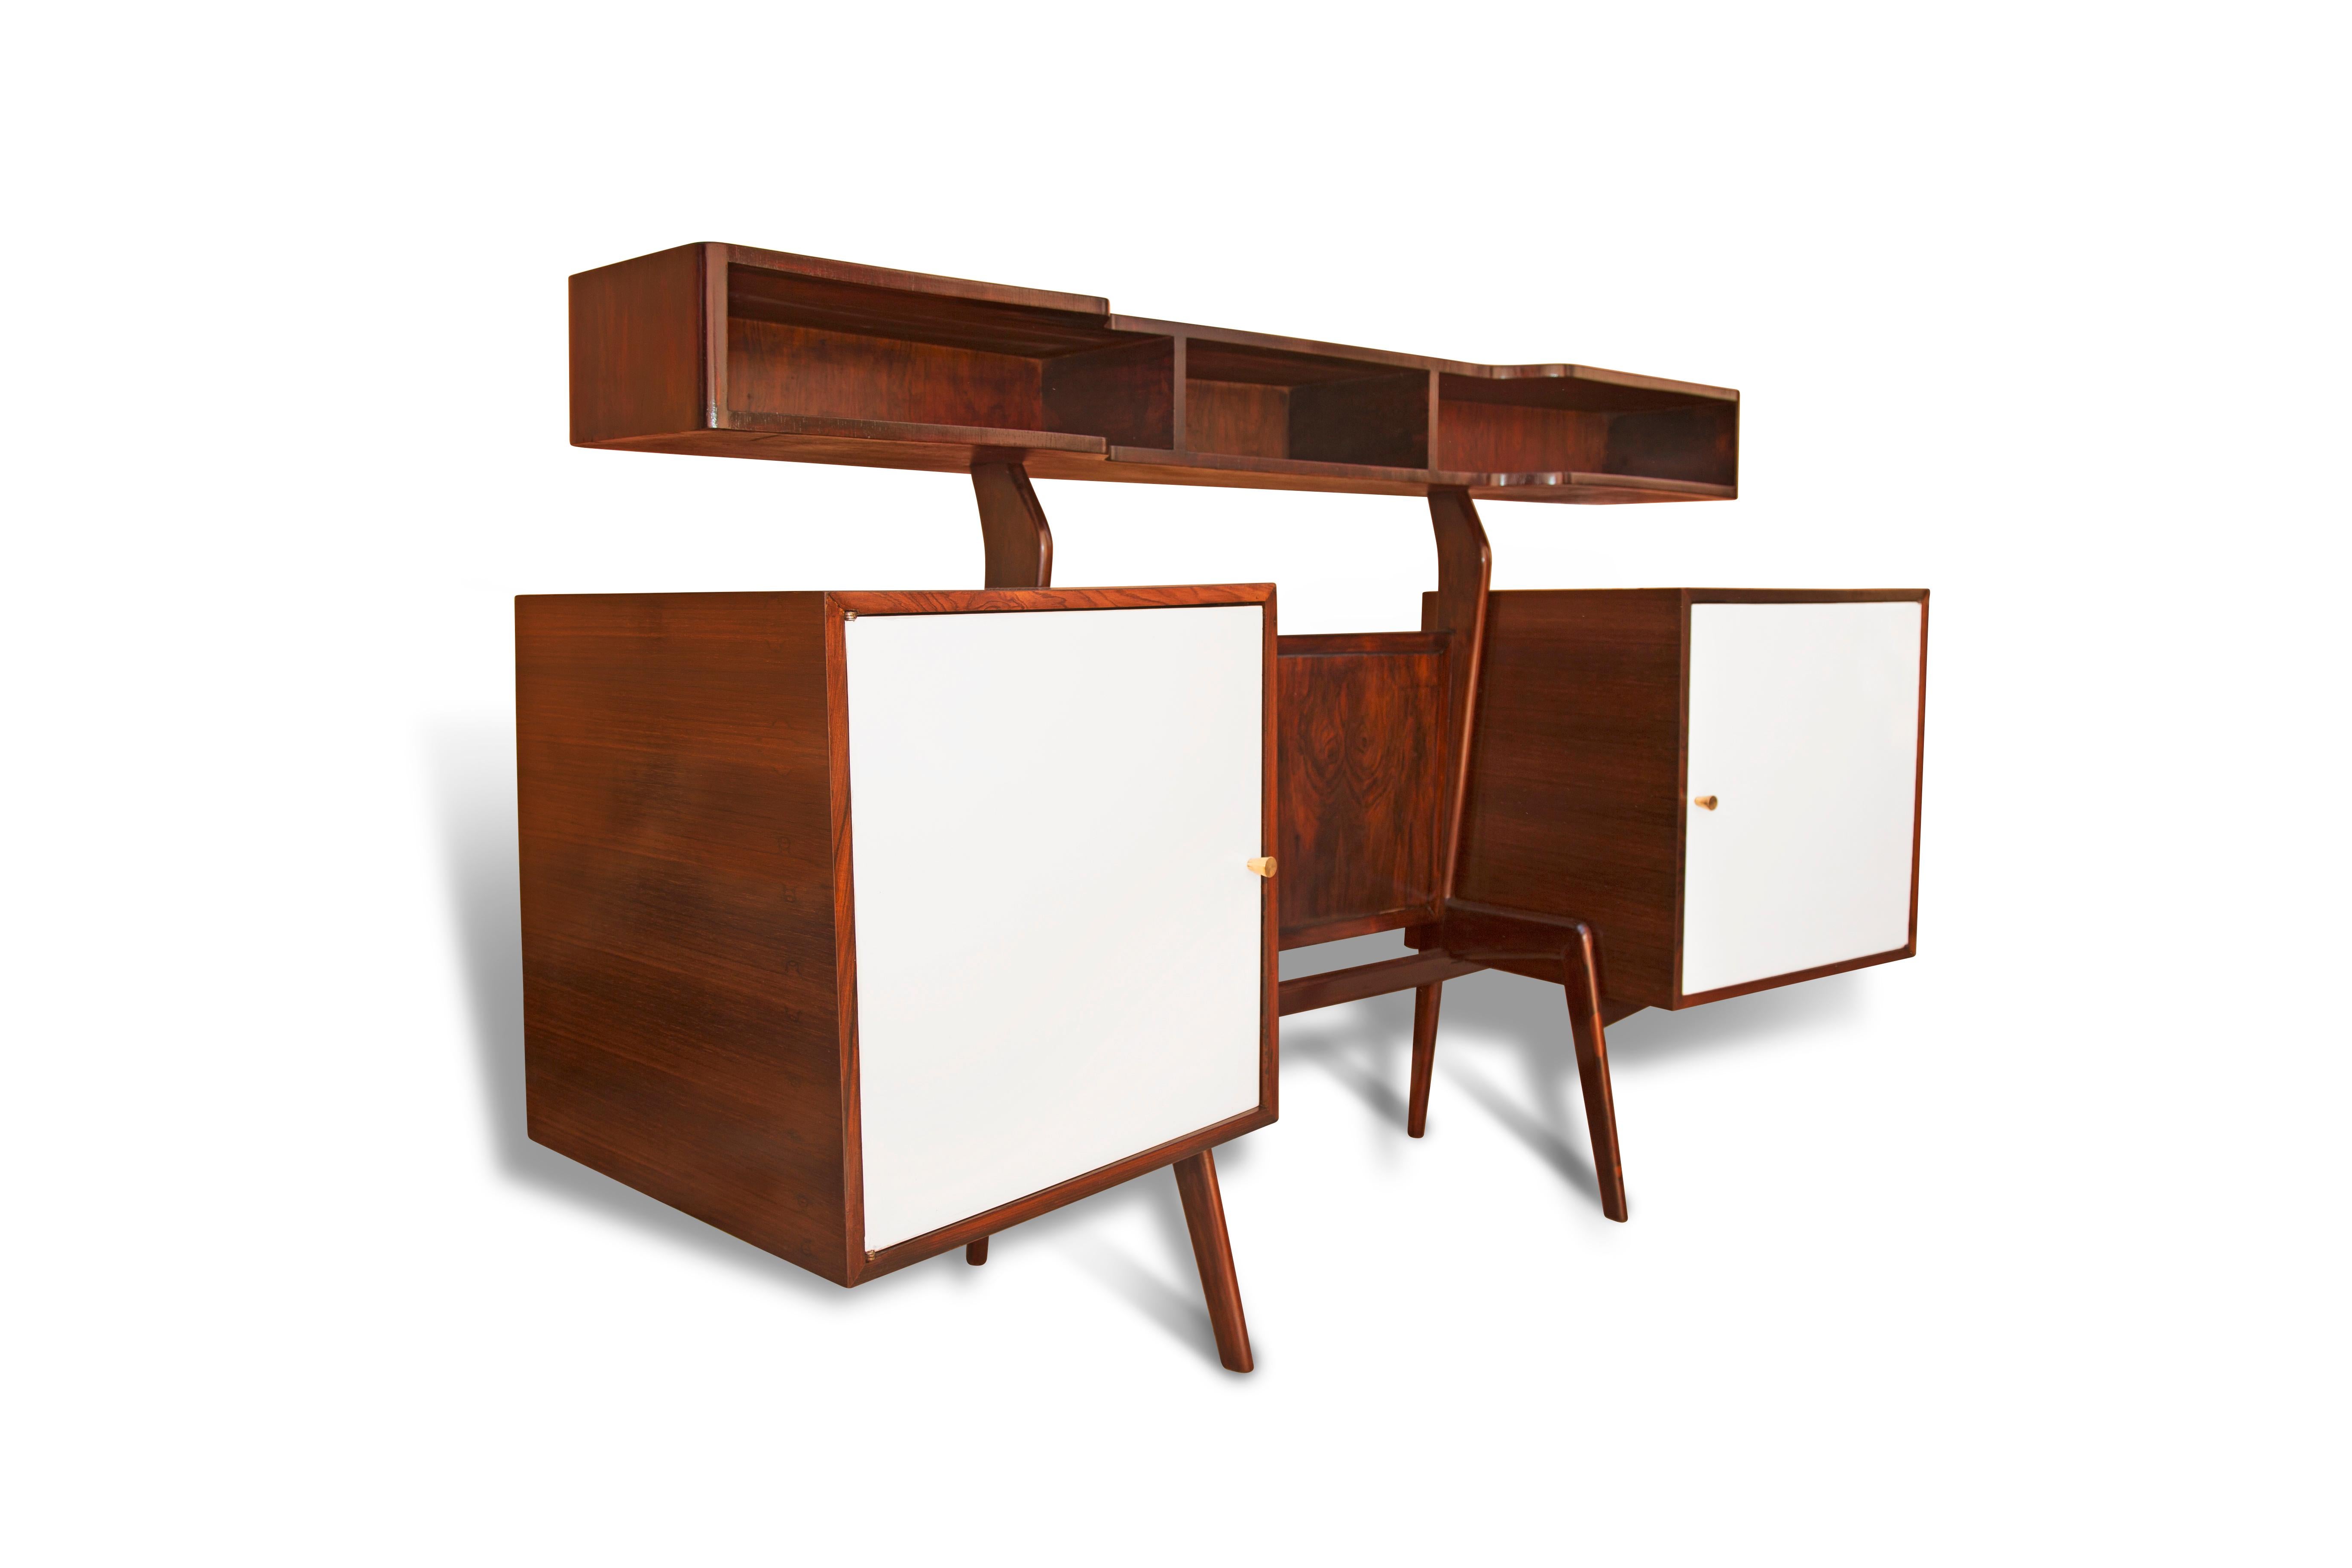 Brazilian Modern Hand Painted Bar in Hardwood by G. Scapinelli, 1950s, Brazil For Sale 3